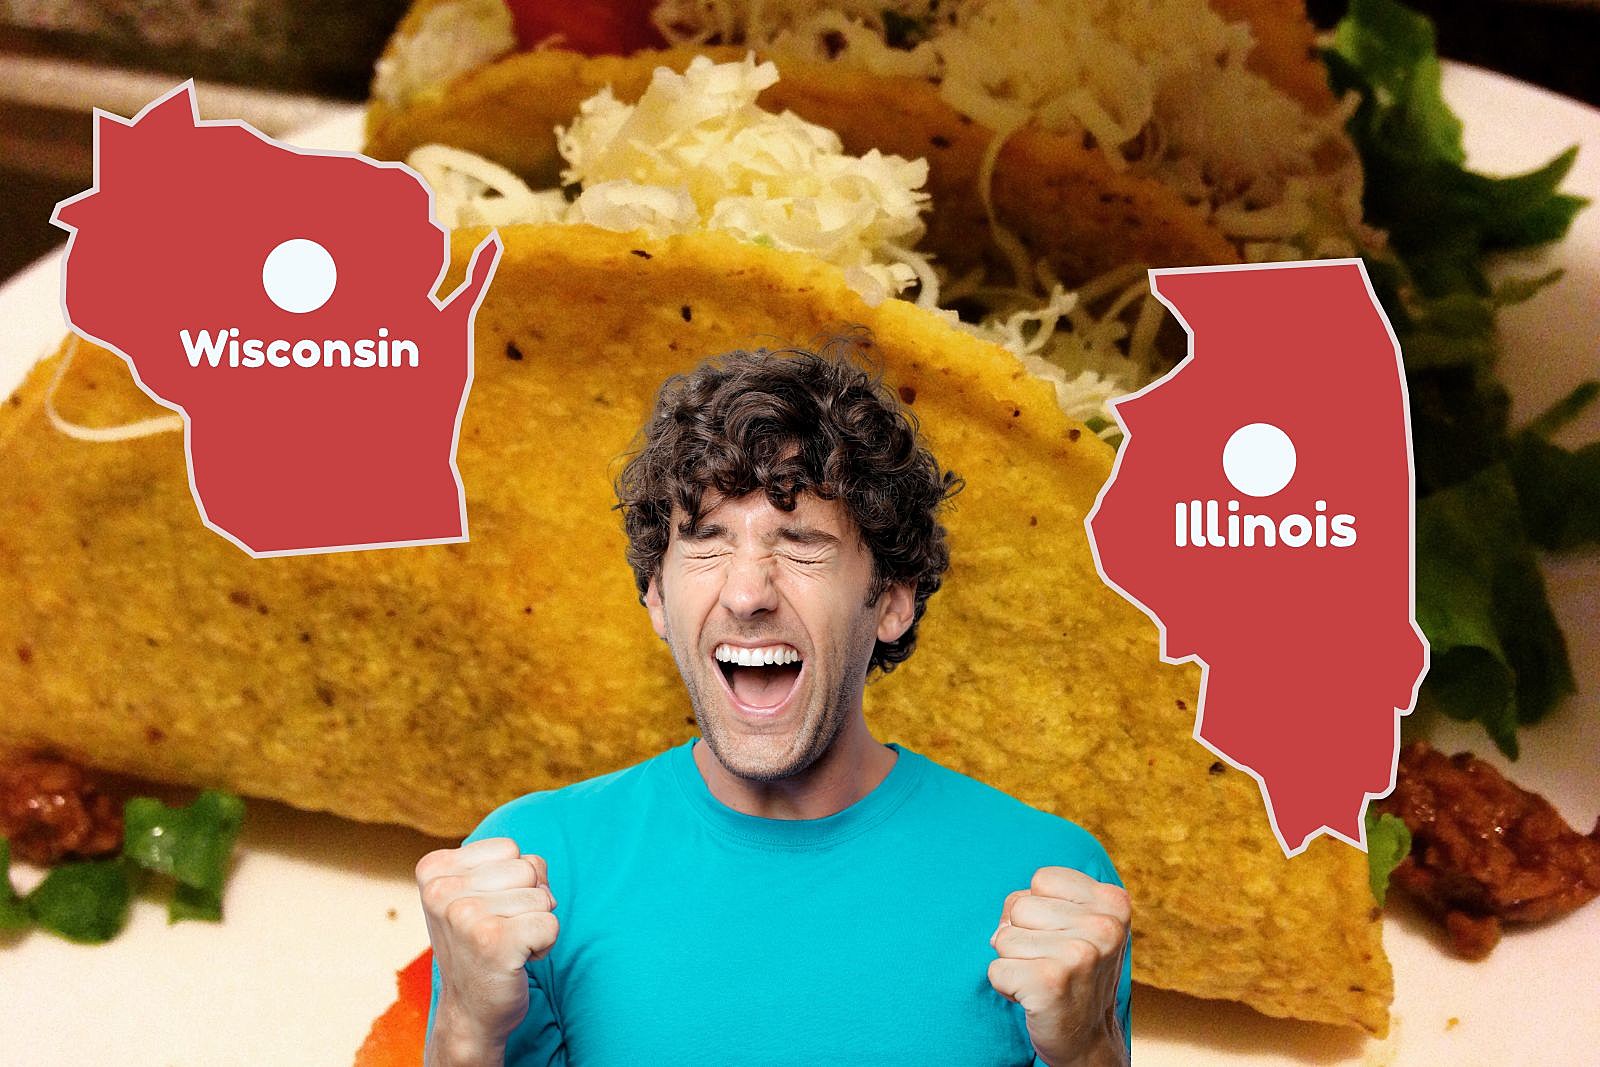 Illinois, Wisconsin Can Get a Free Taco on Tuesdays Until 9/5